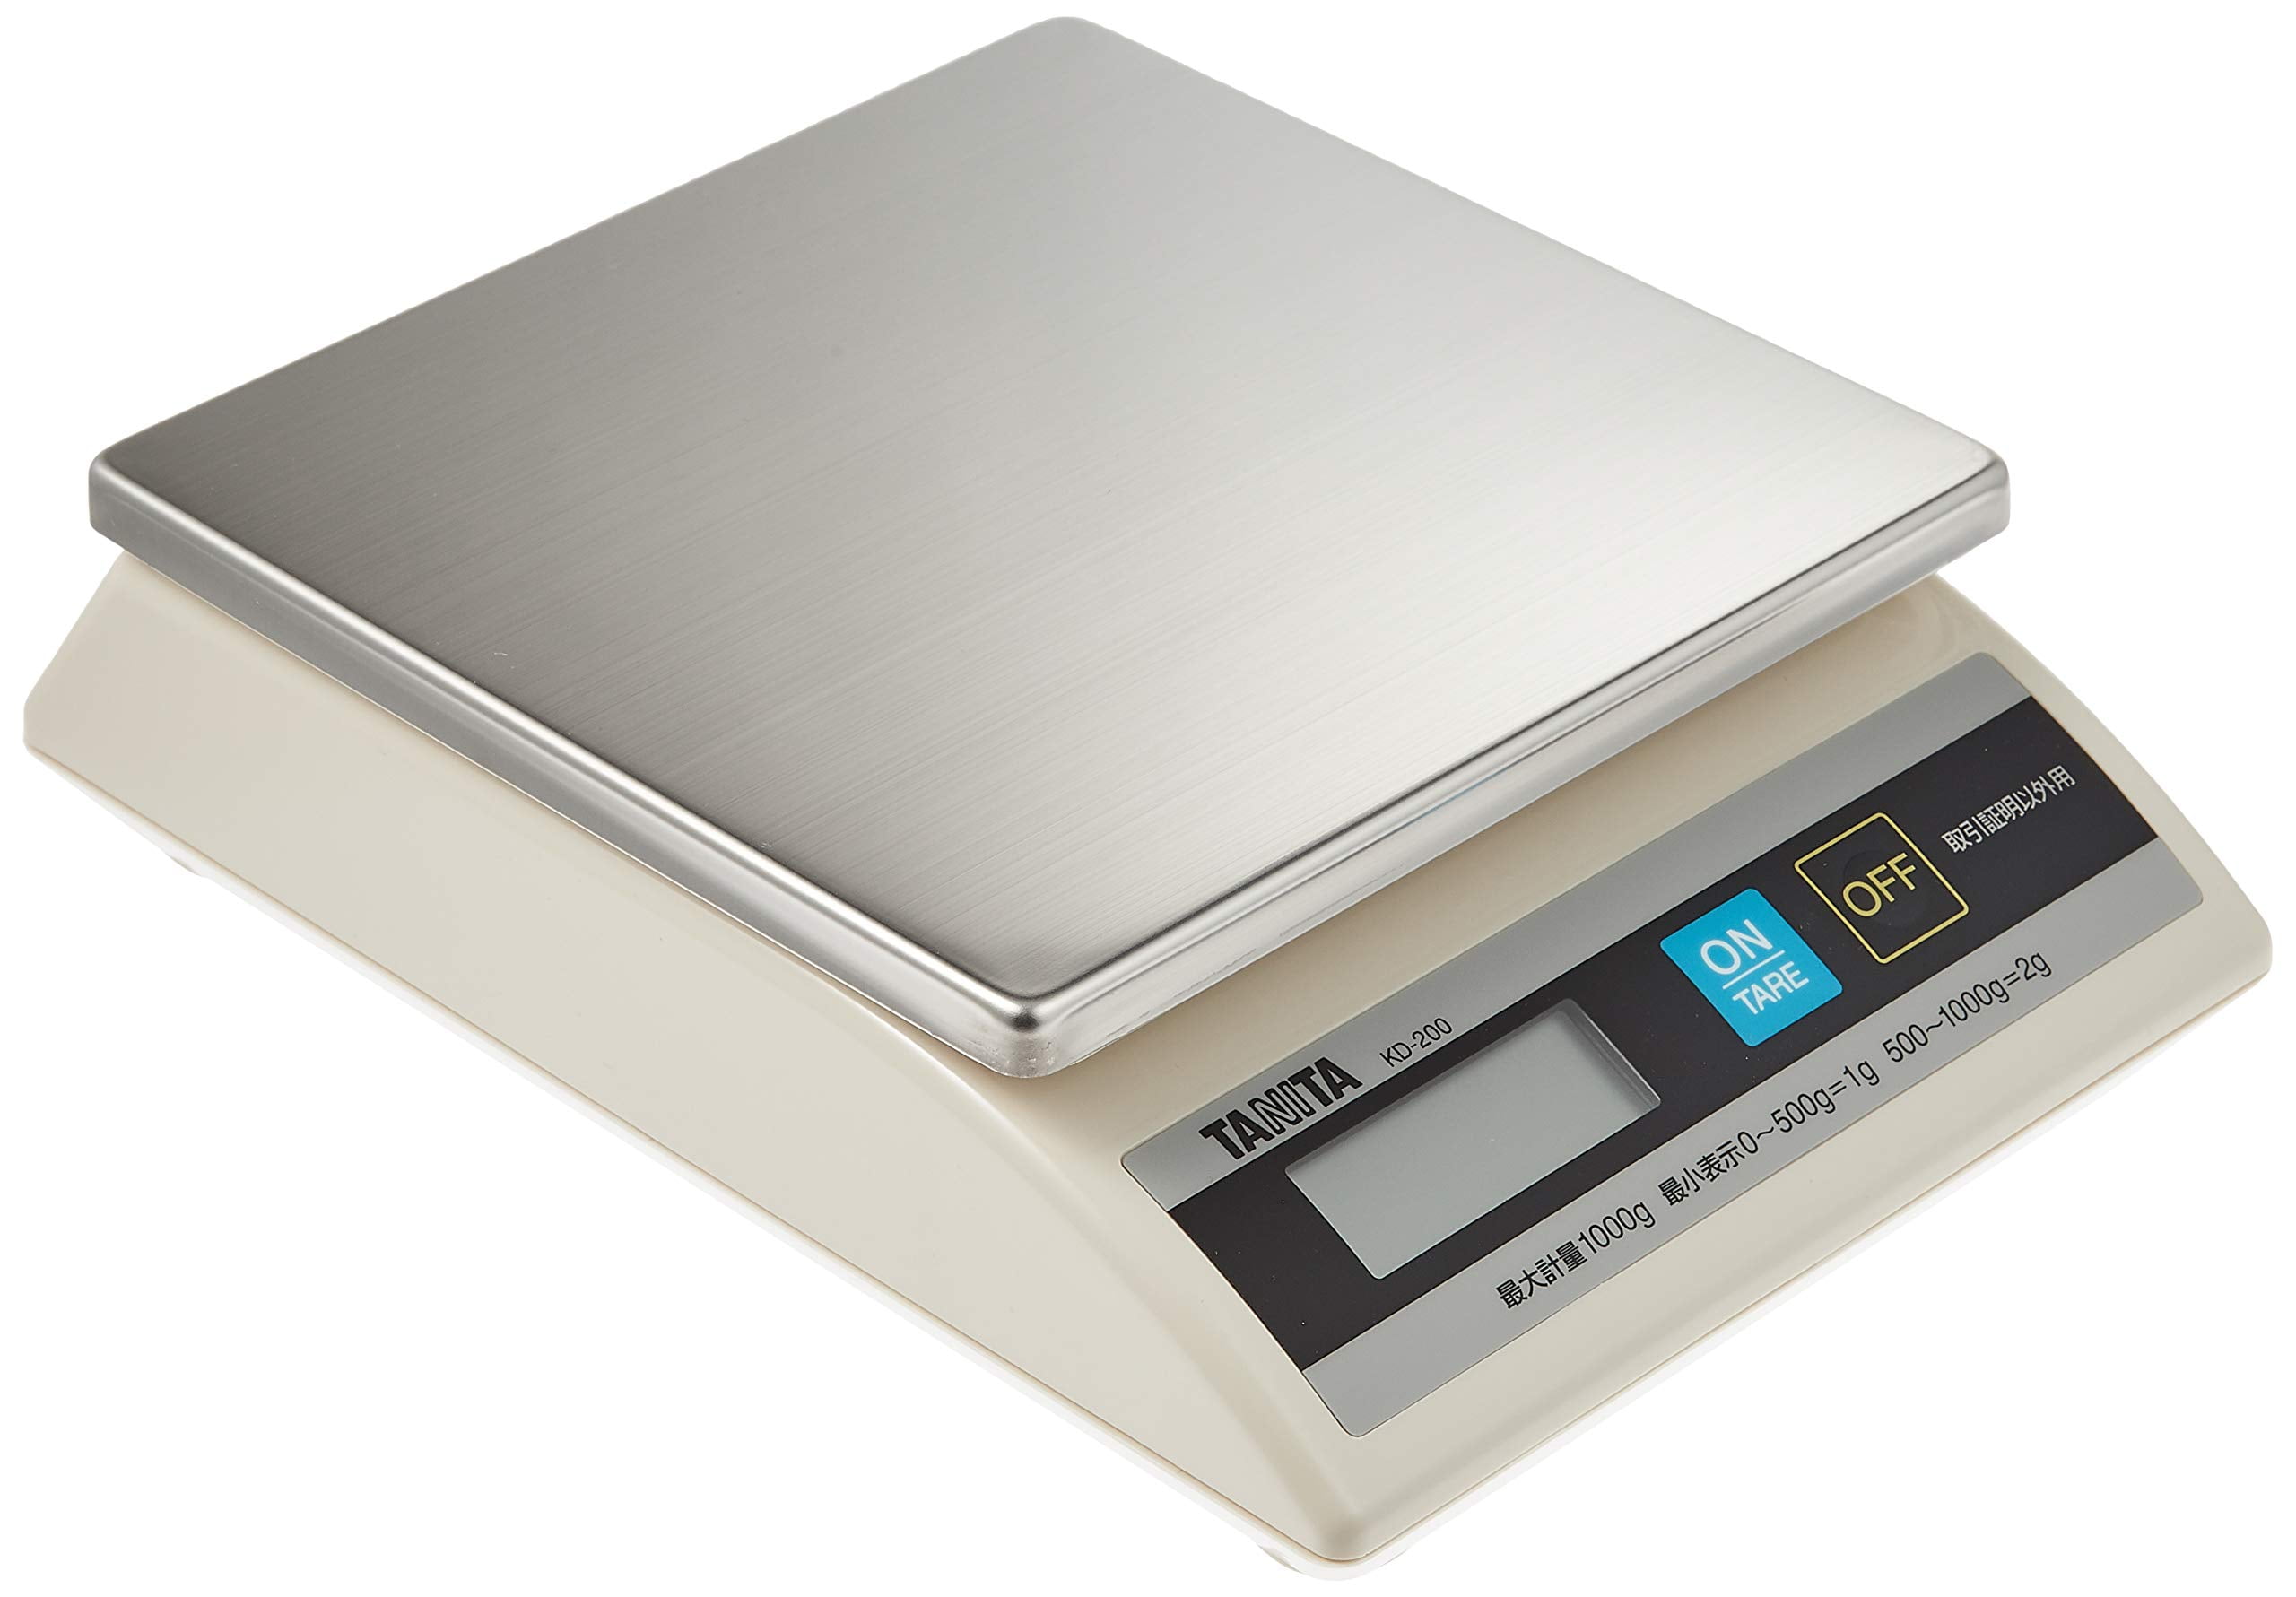 Tanita KD-200-110 Digital Food Scale, 1000 g x 1 g (35 oz x 0.05 oz) -  Coupons and Discounts May be Available